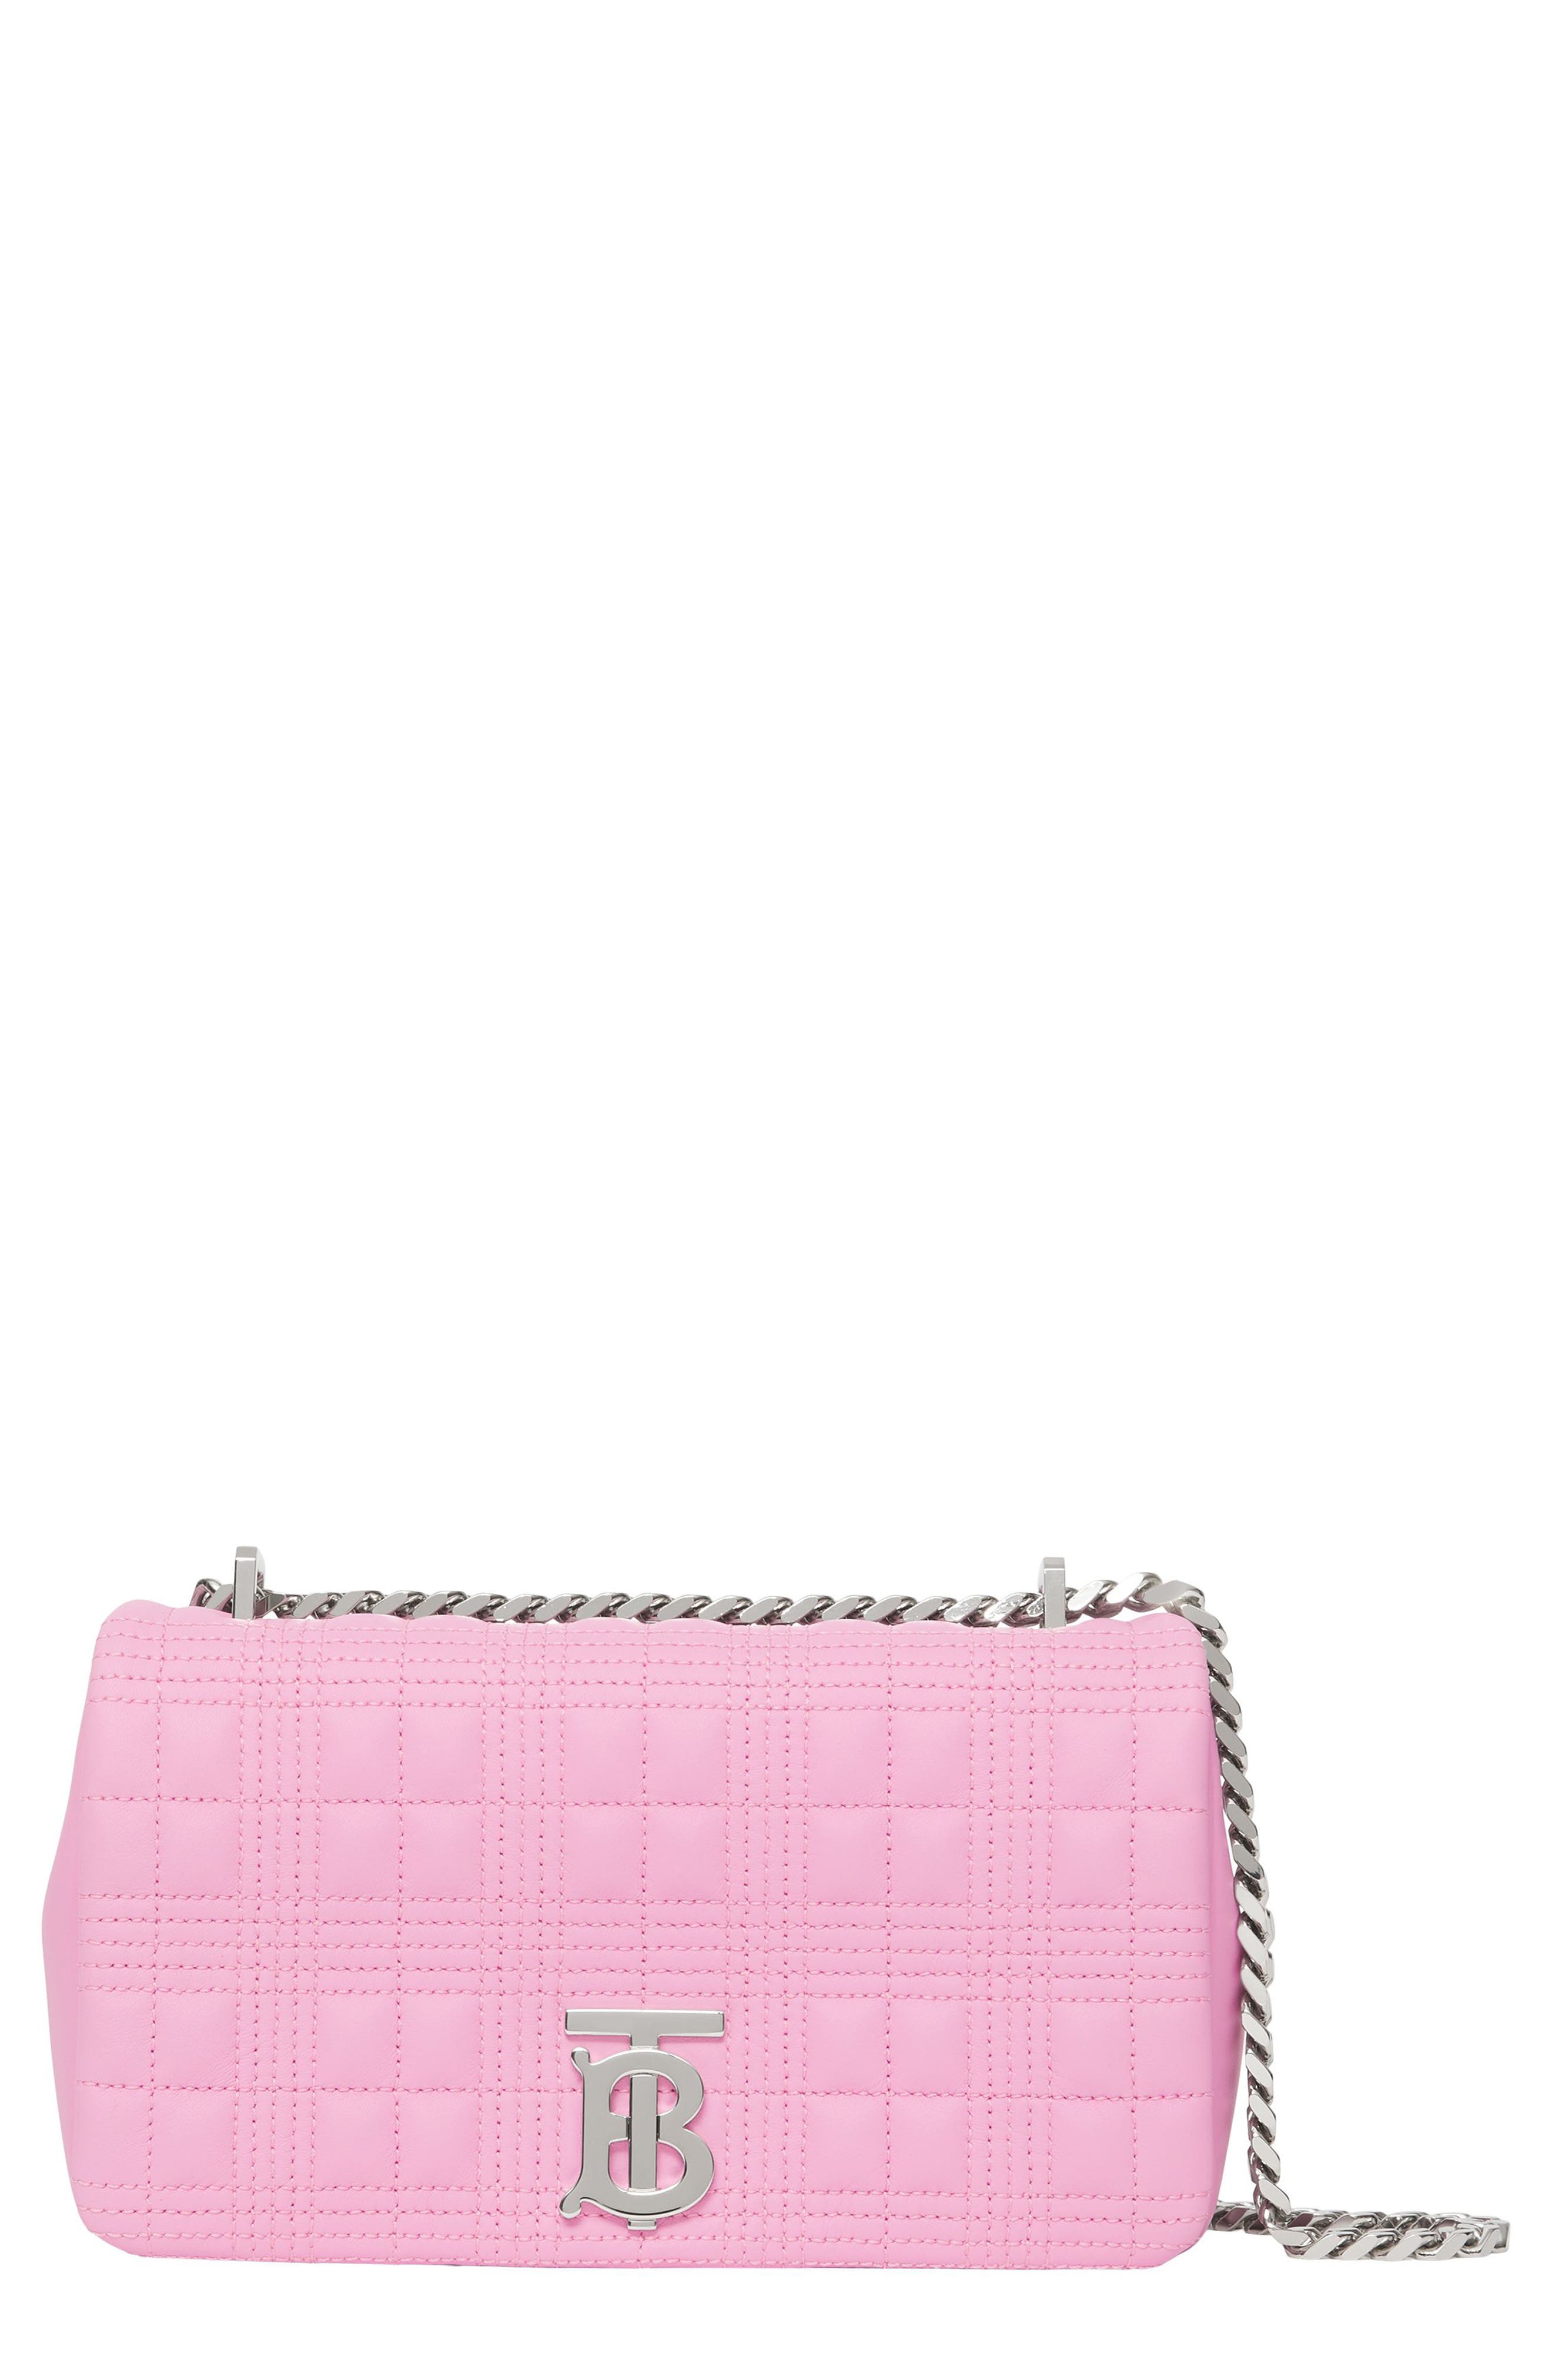 Burberry Small Lola Quilted Leather Shoulder Bag in Primrose Pink at Nordstrom